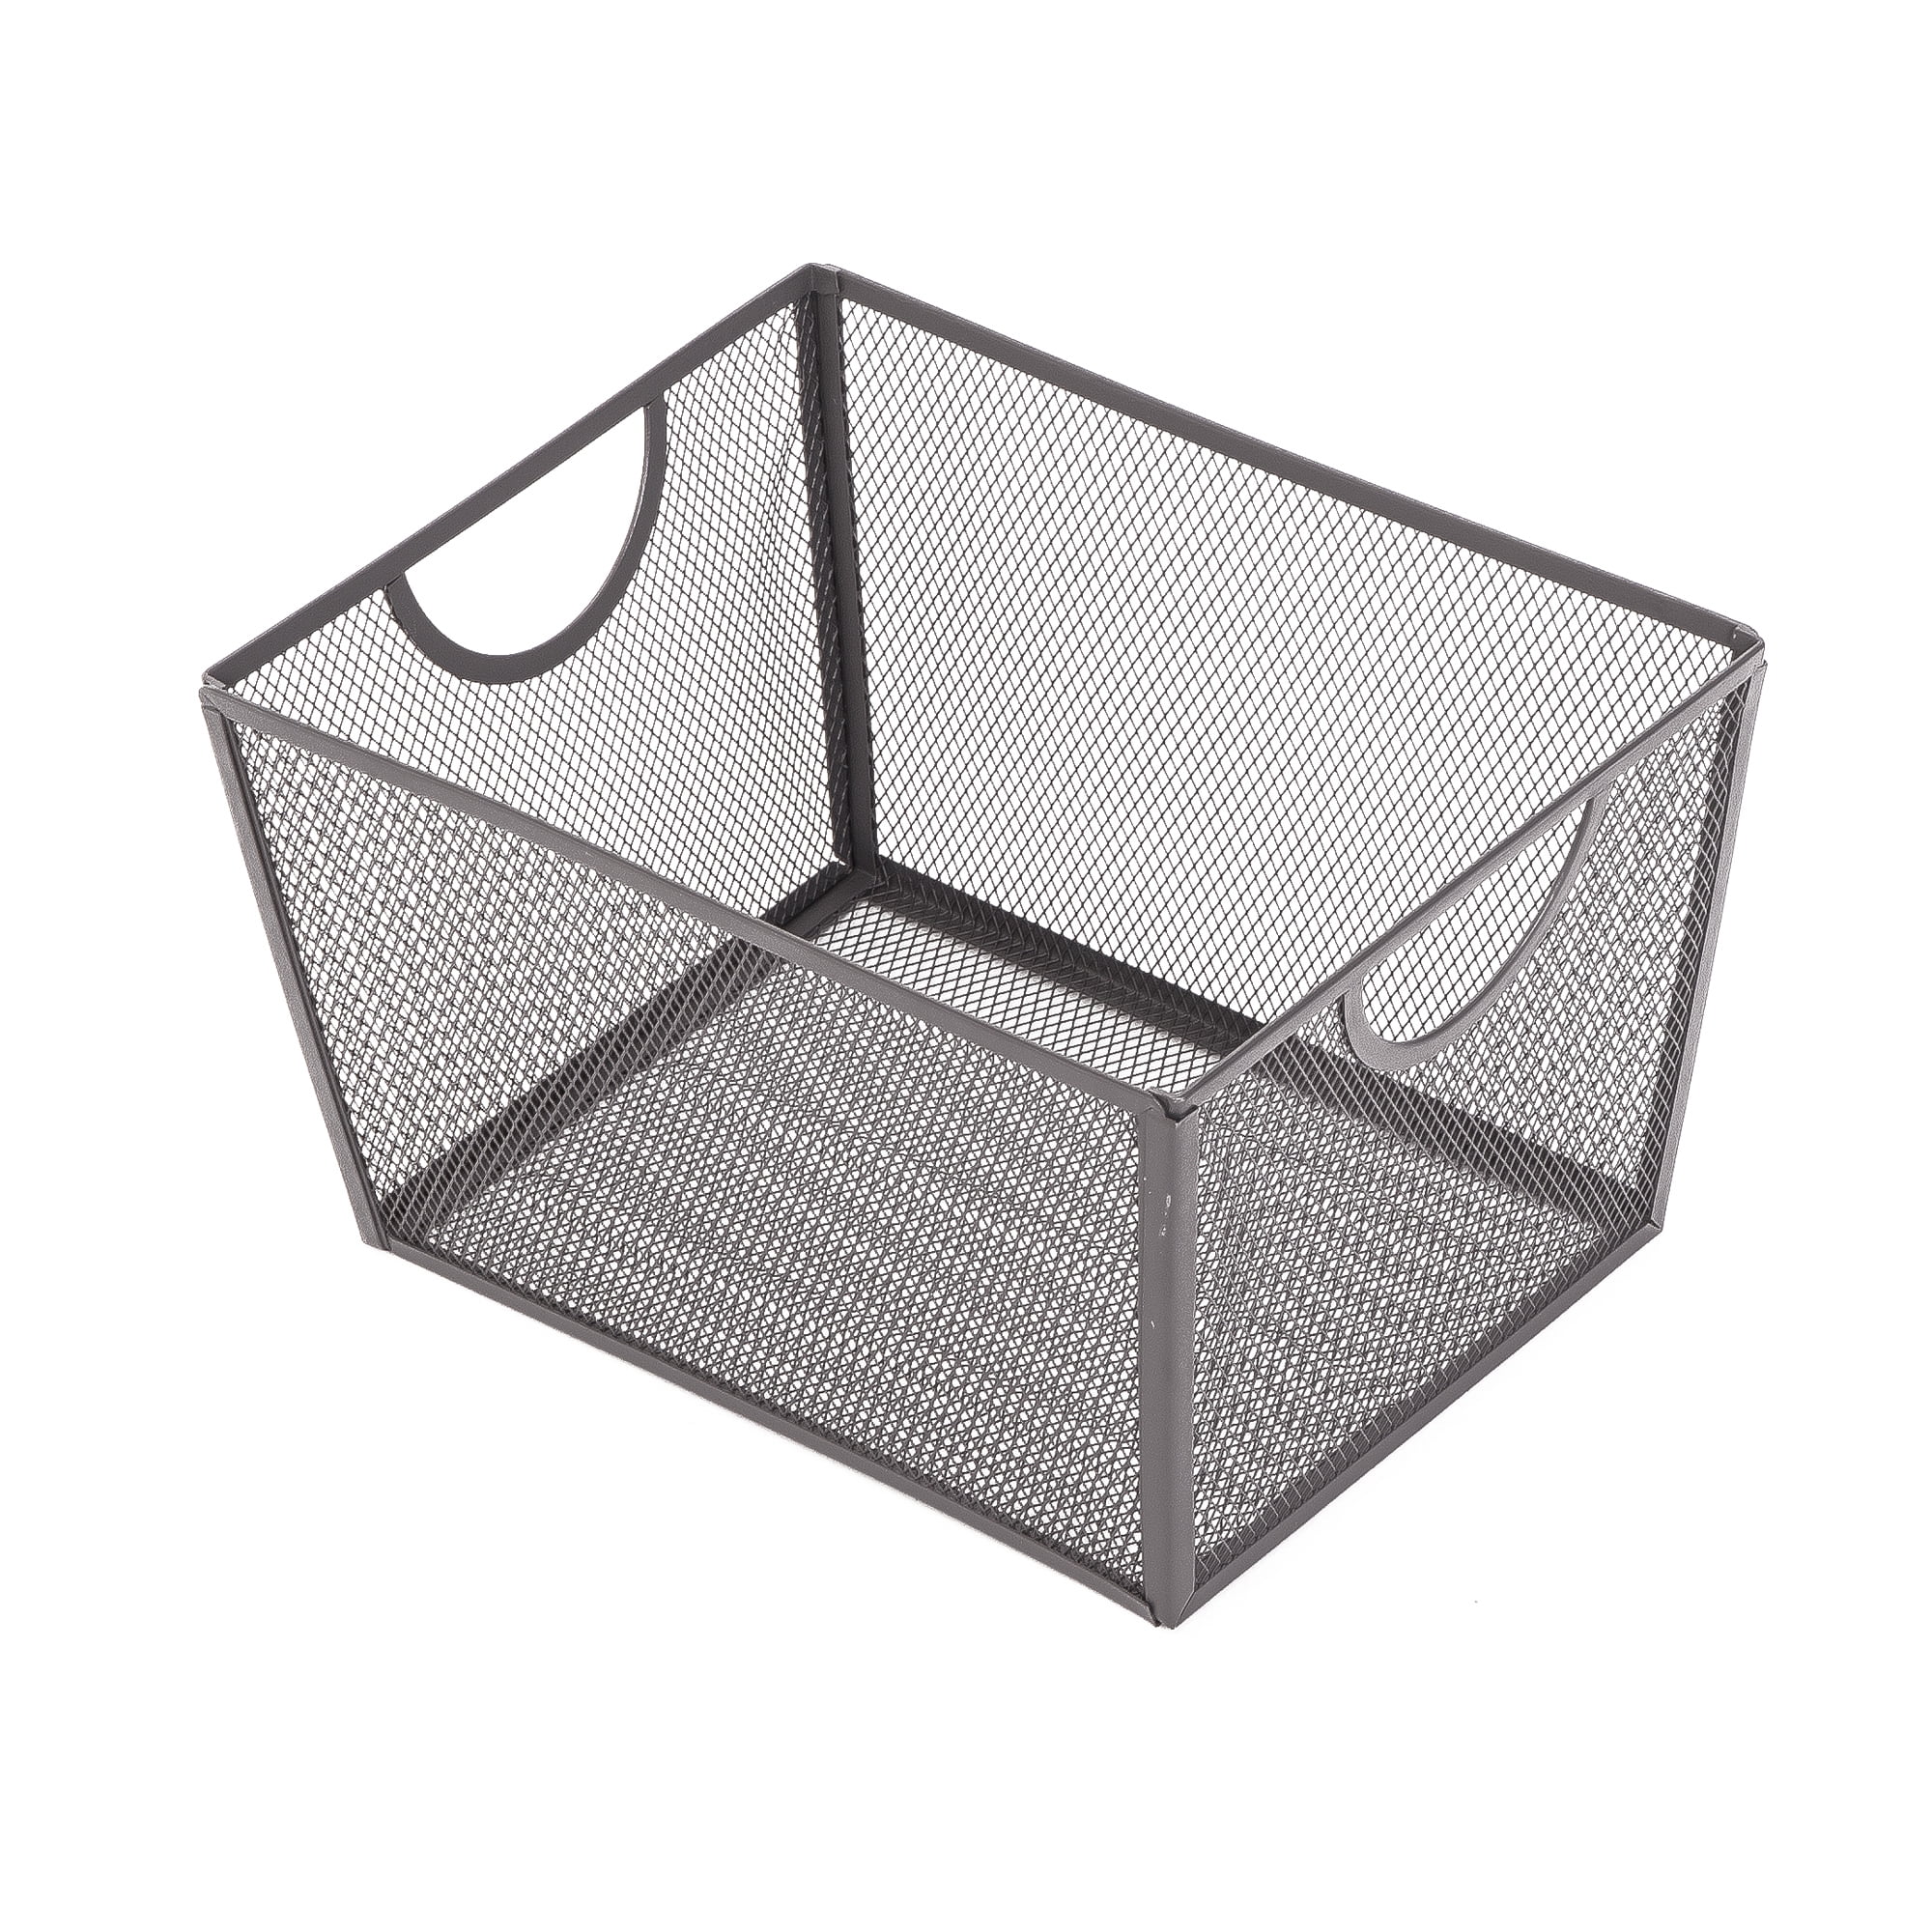 Mainstays Mesh Basket Kitchen Pantry Organization with Keyhole Handles for  Easy Carry Steel, 10x8x6 